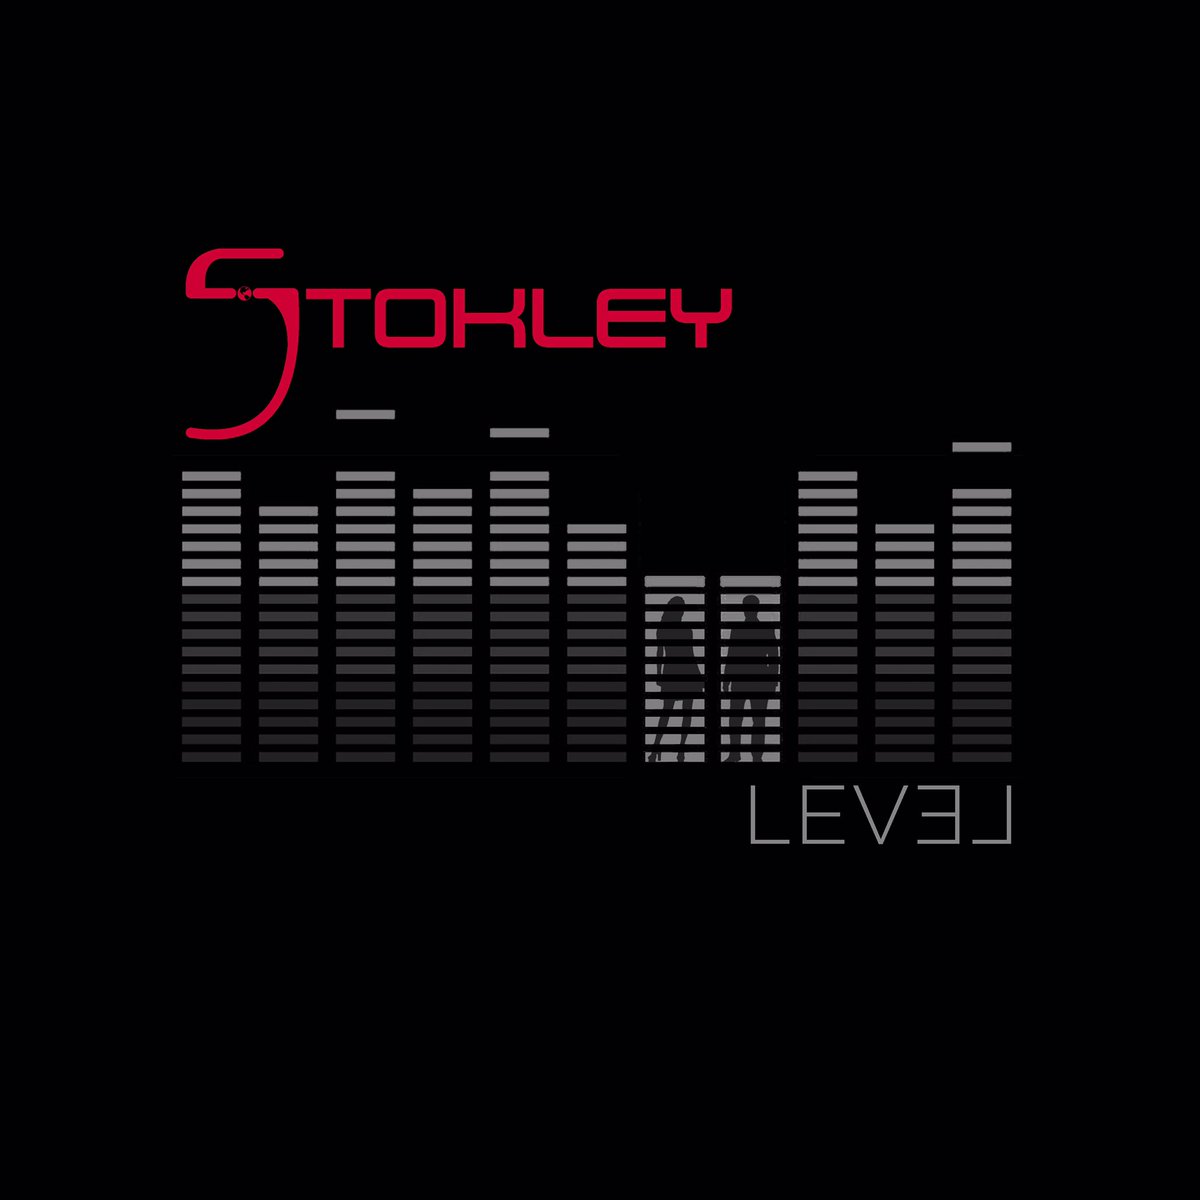 New Video: Stokley Williams (of Mint Condition) - Level